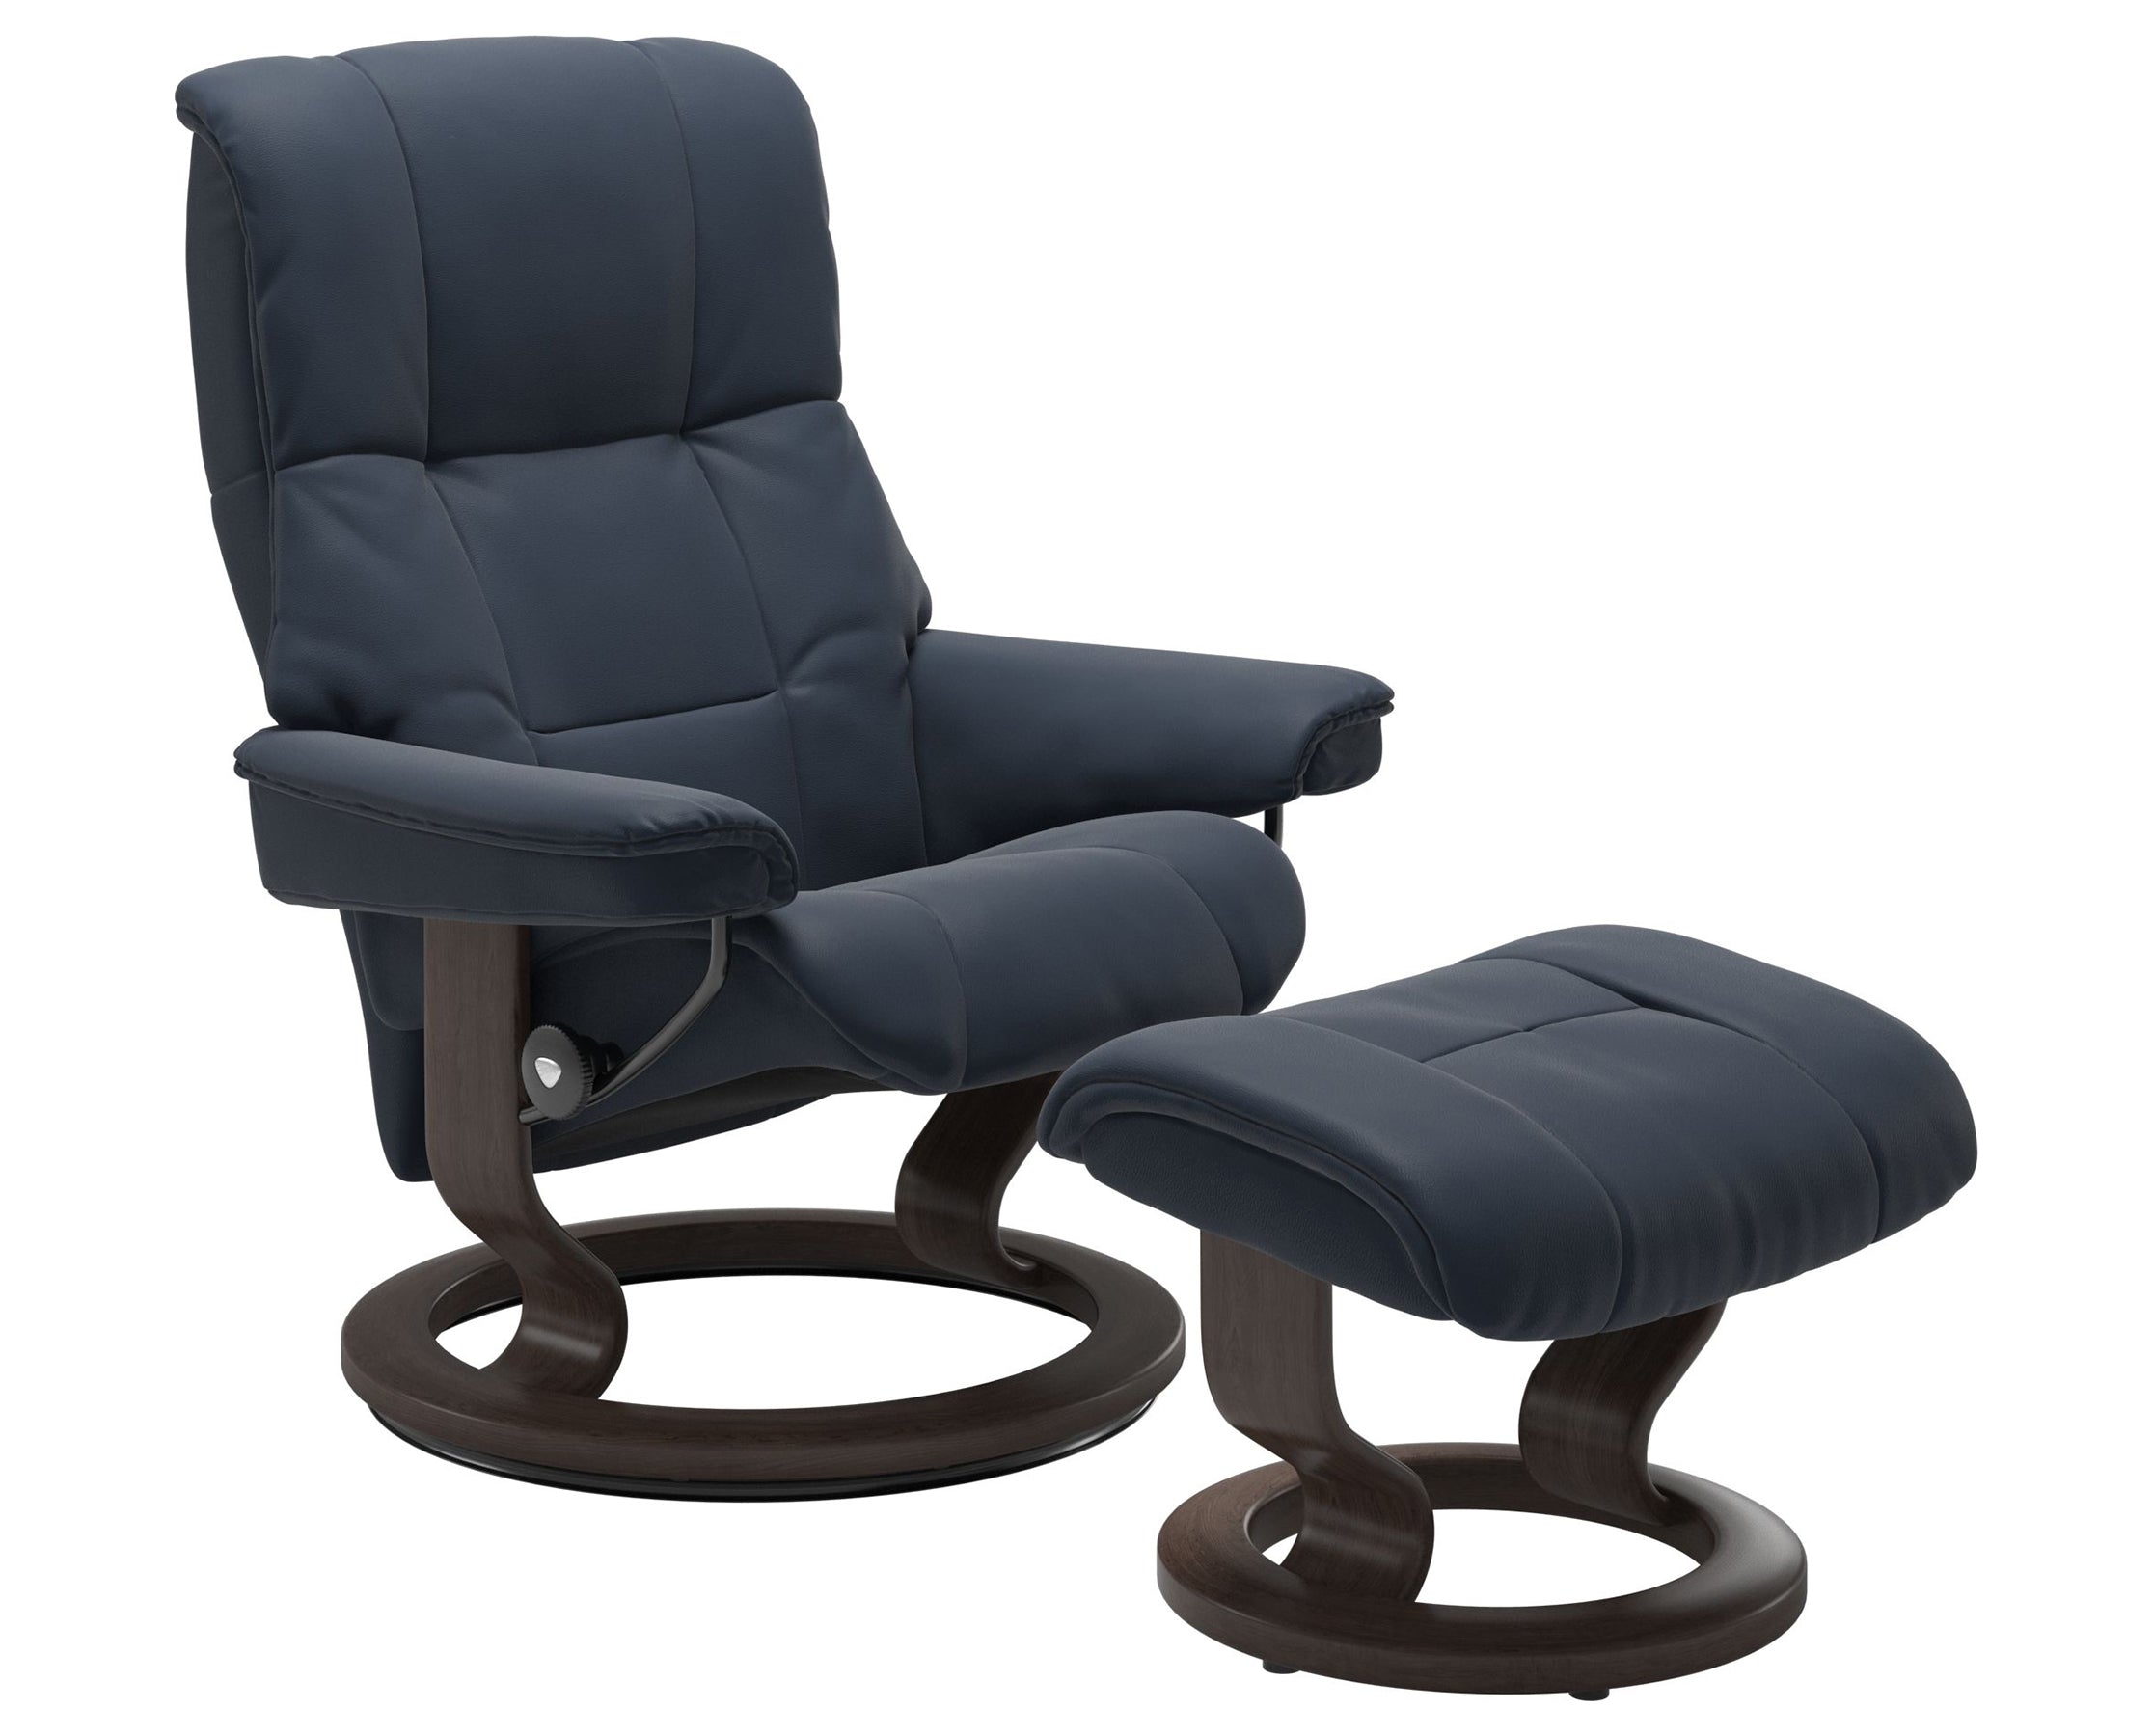 Paloma Leather Oxford Blue S/M/L and Wenge Base | Stressless Mayfair Classic Recliner | Valley Ridge Furniture